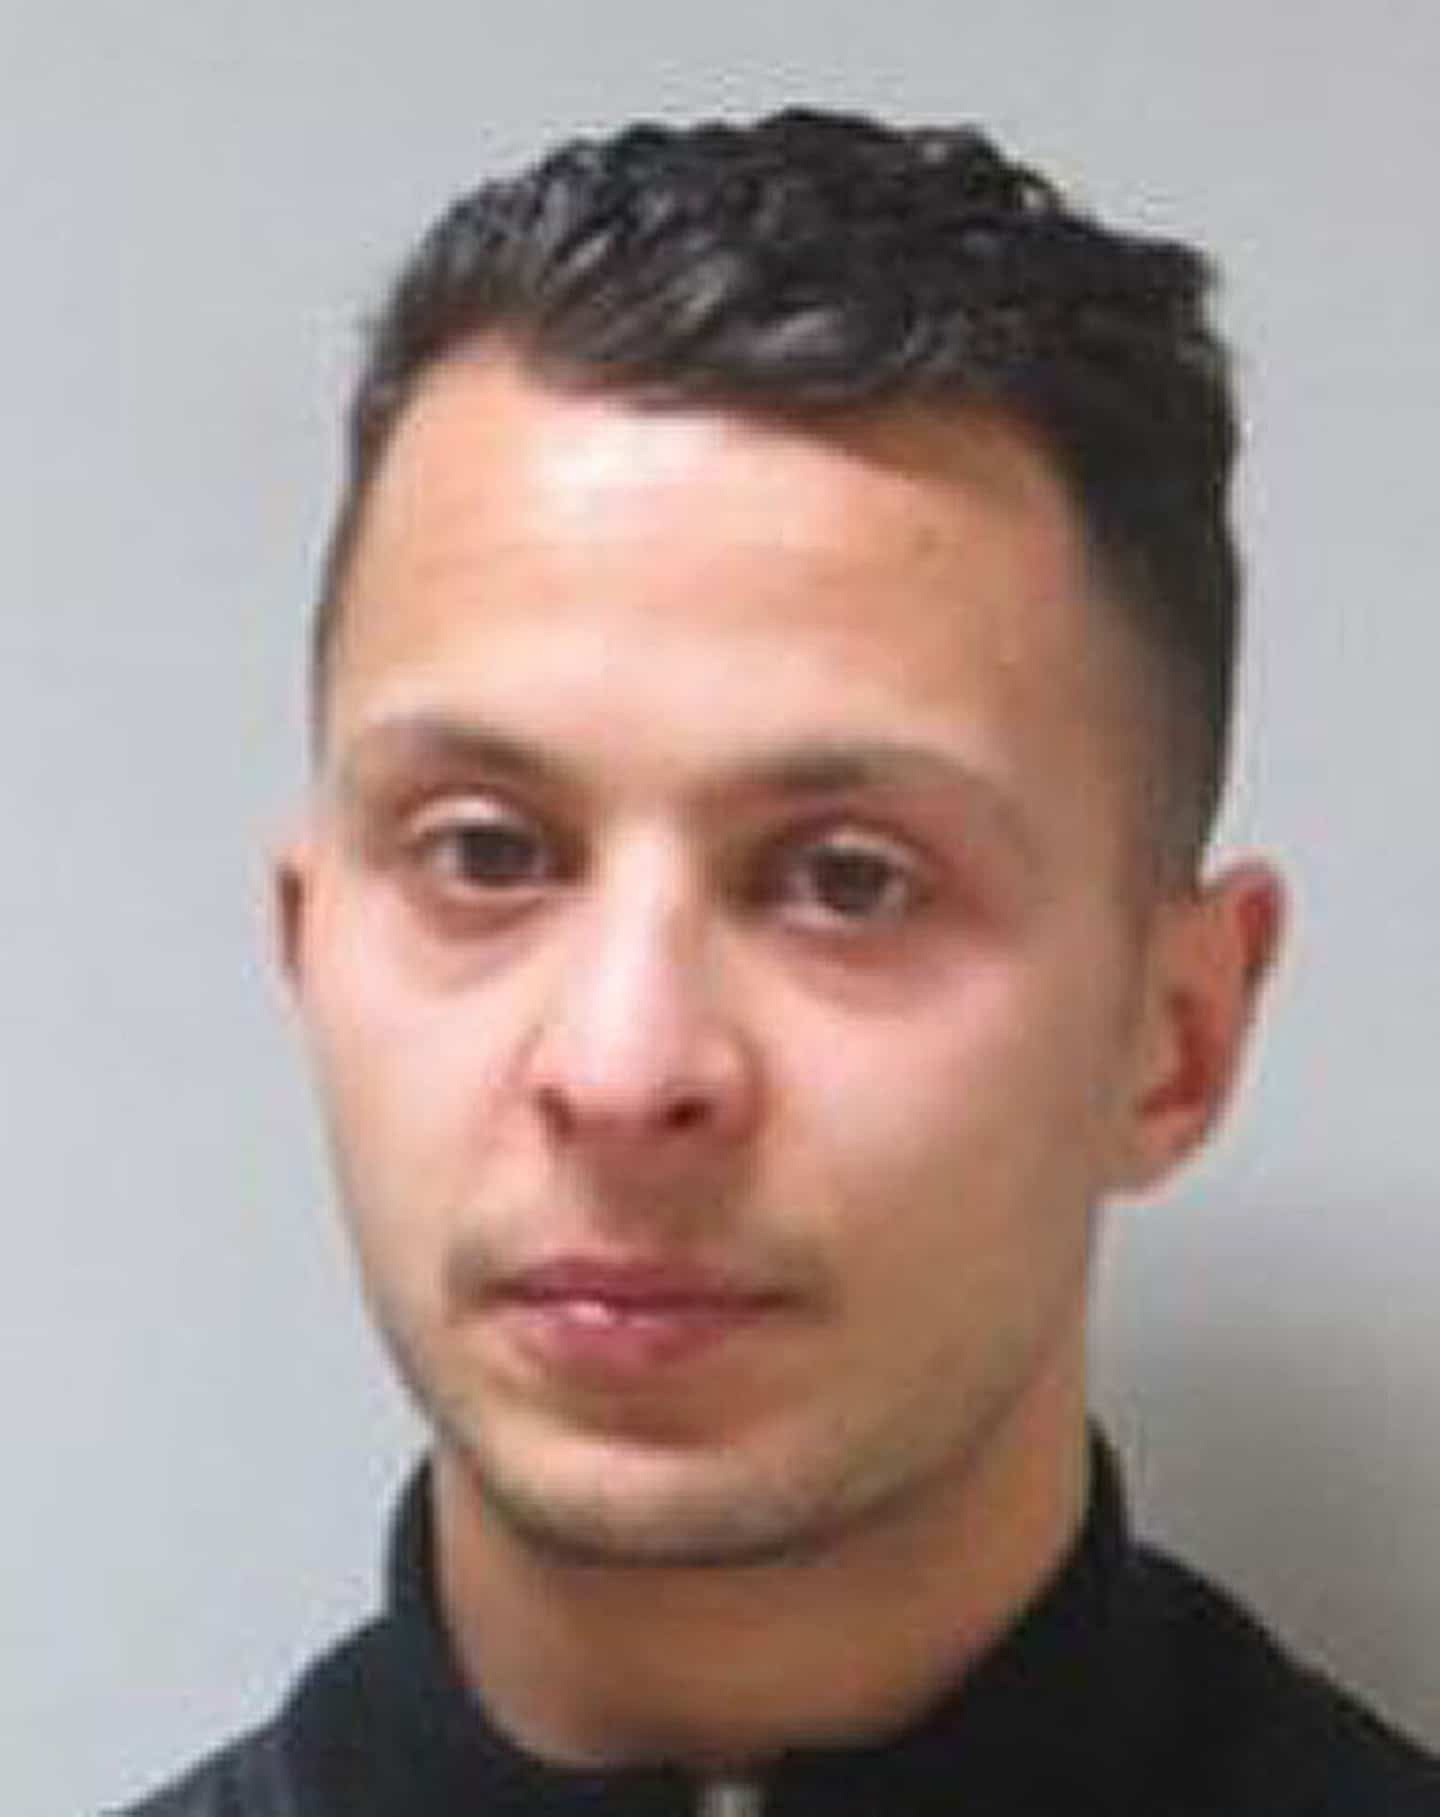 Trial of the November 13, 2015 attacks: life imprisonment required against Salah Abdeslam